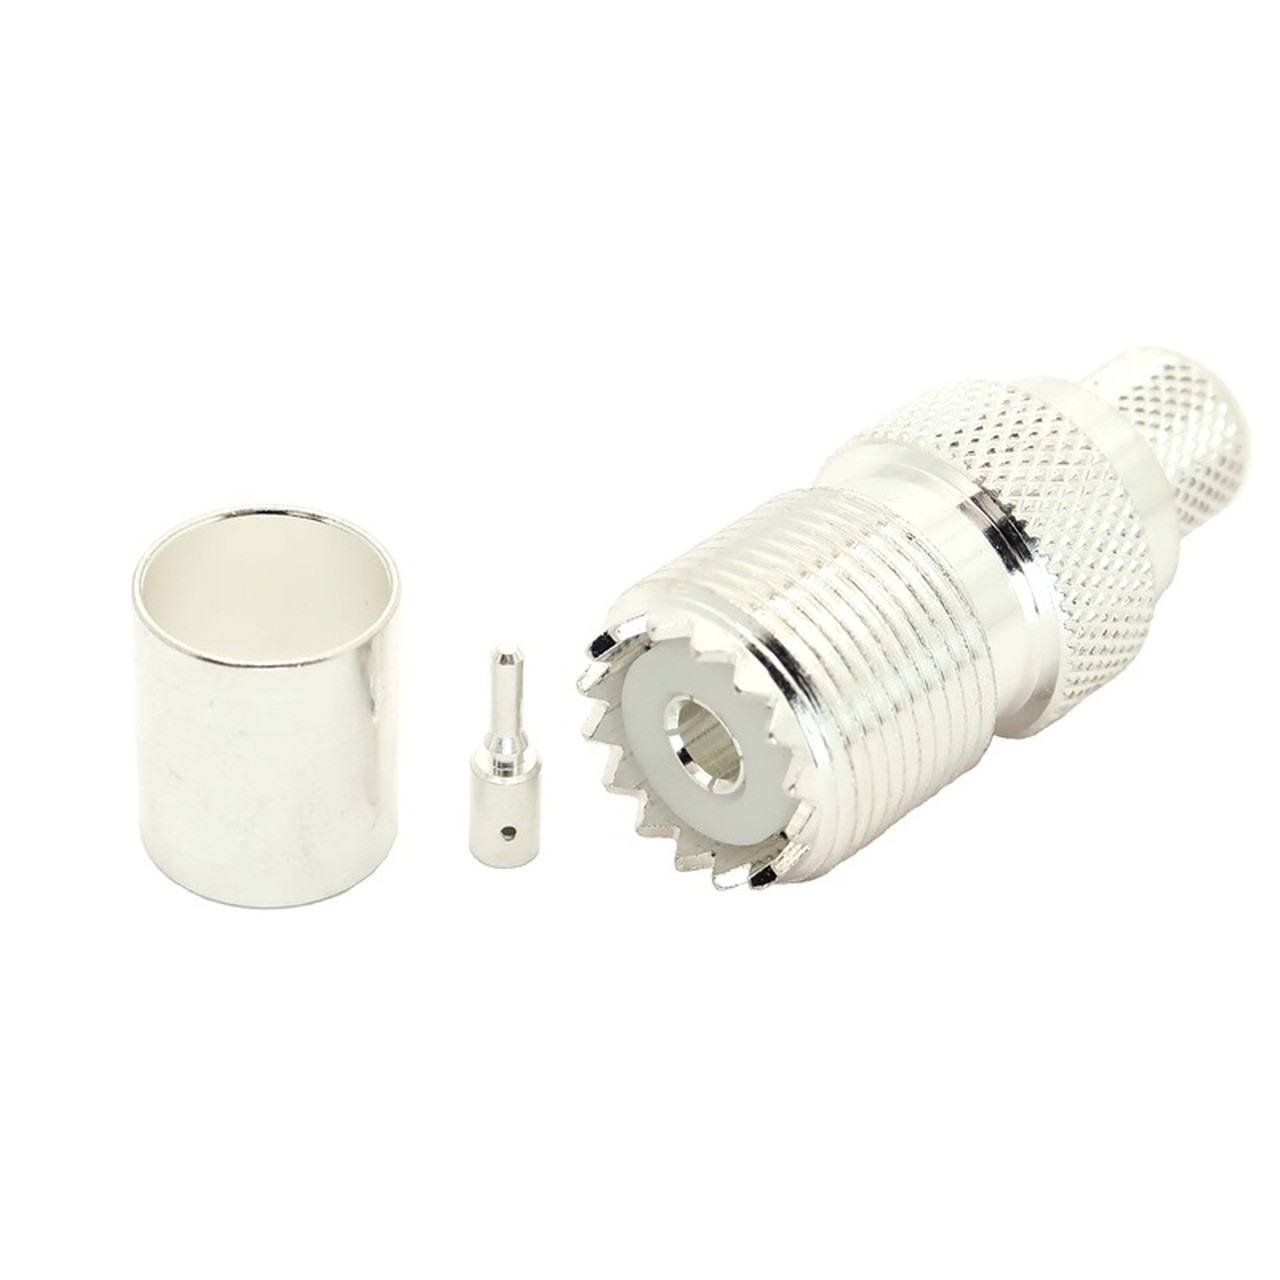 UHF-Female SO239 Cable End Connector RG-8X Coaxial Cable